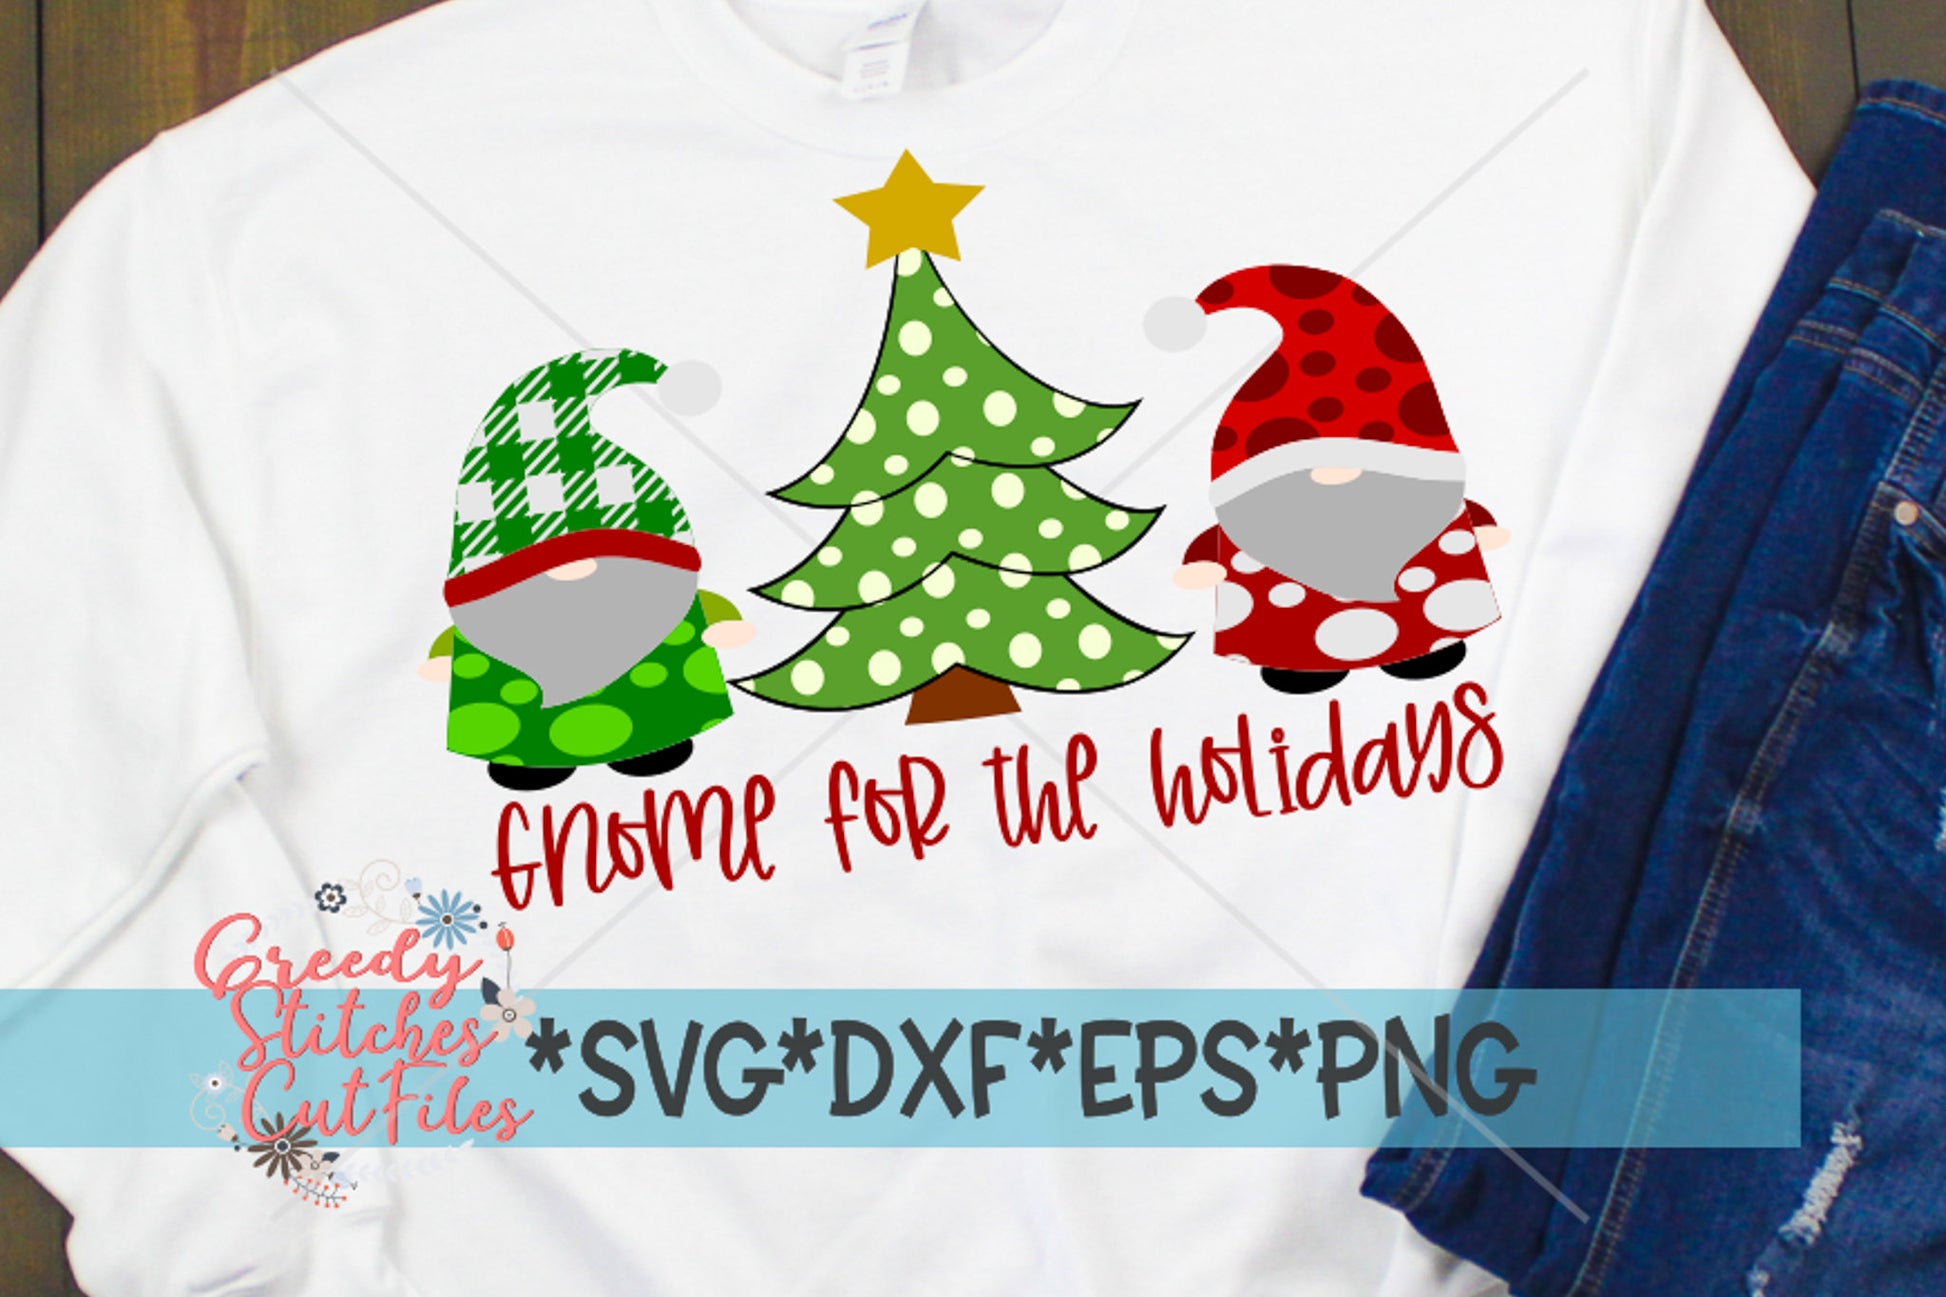 Gnome For The Holidays svg dxf eps png. Christmas SvG | Gnome SvG | Gnomes SvG | Christmas DxF | Gnomes DxF | Instant Download Cut File